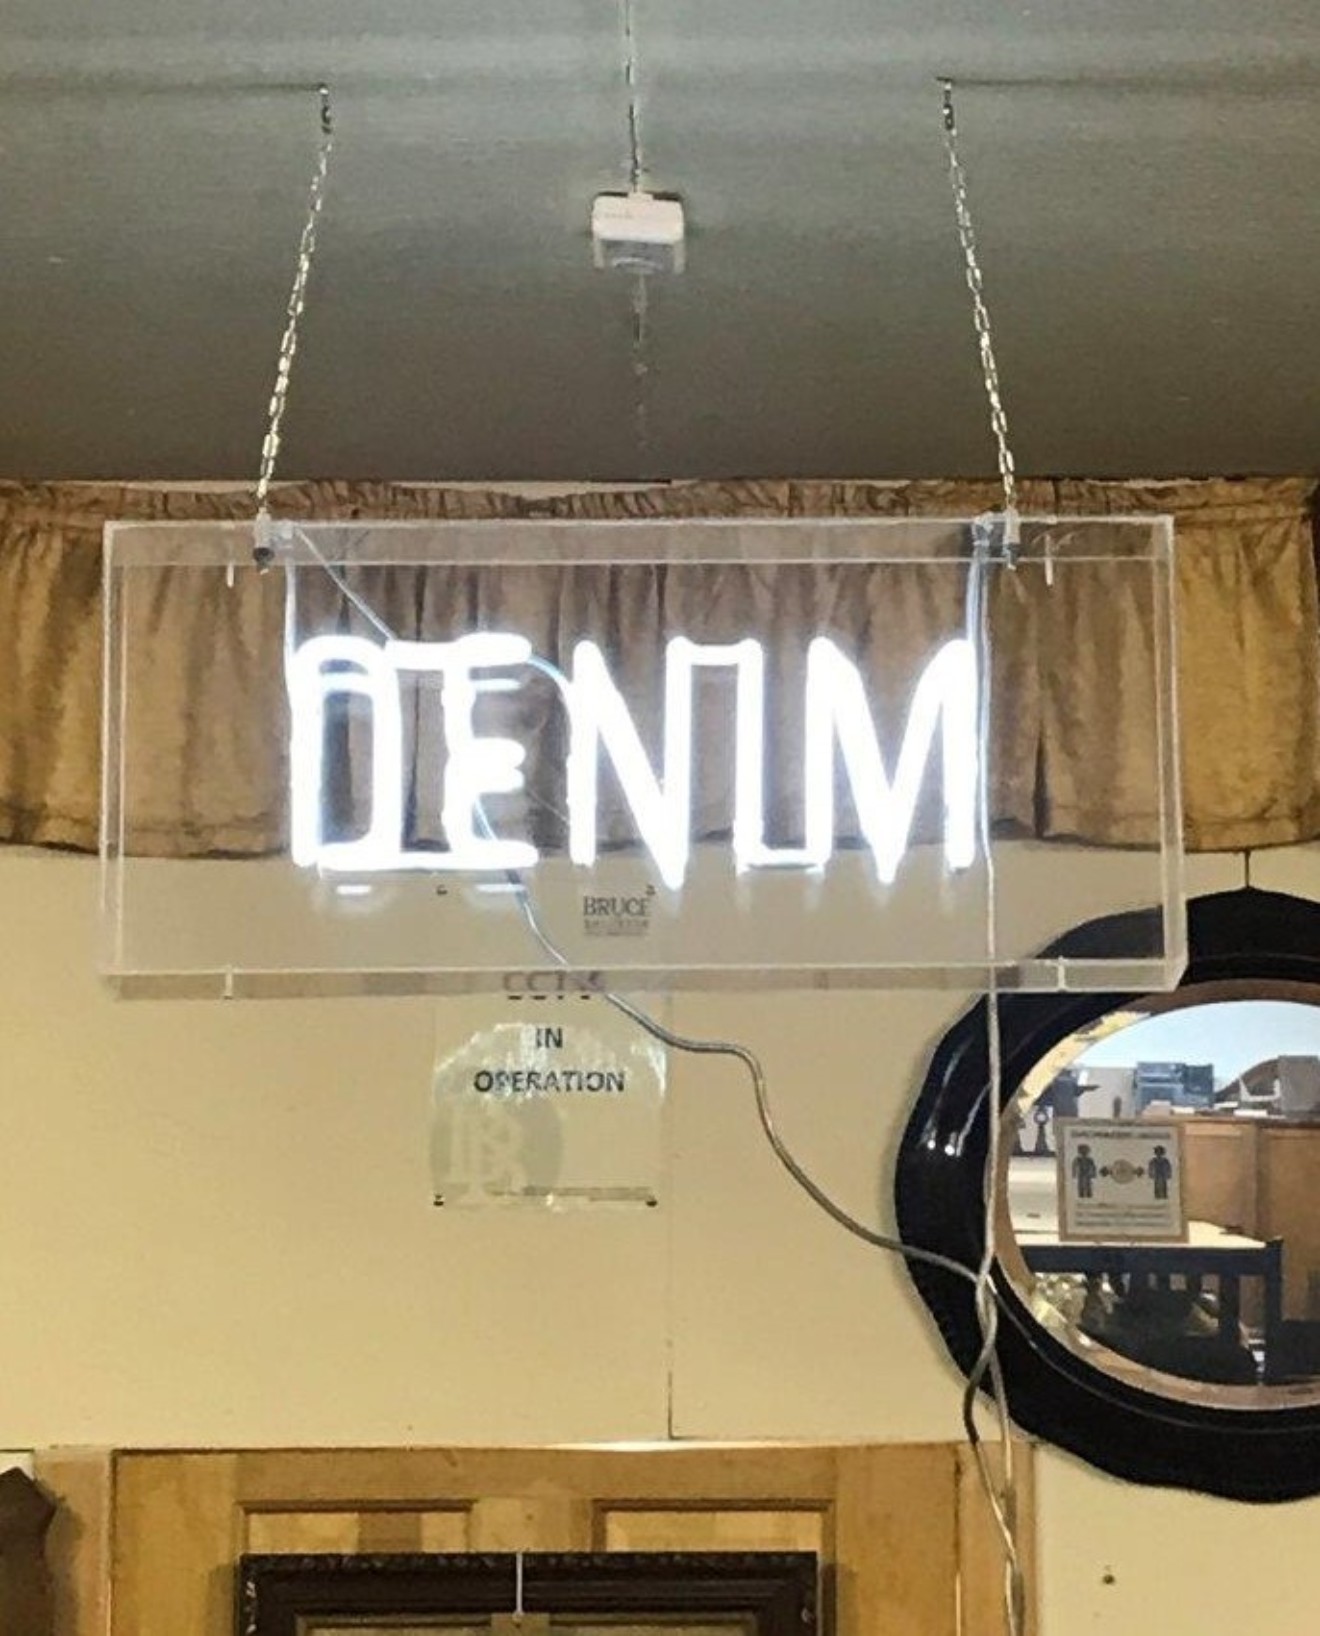 Neon "DENIM" Hanging Sign Perspex and Neon Retail Clothing Shop Sign